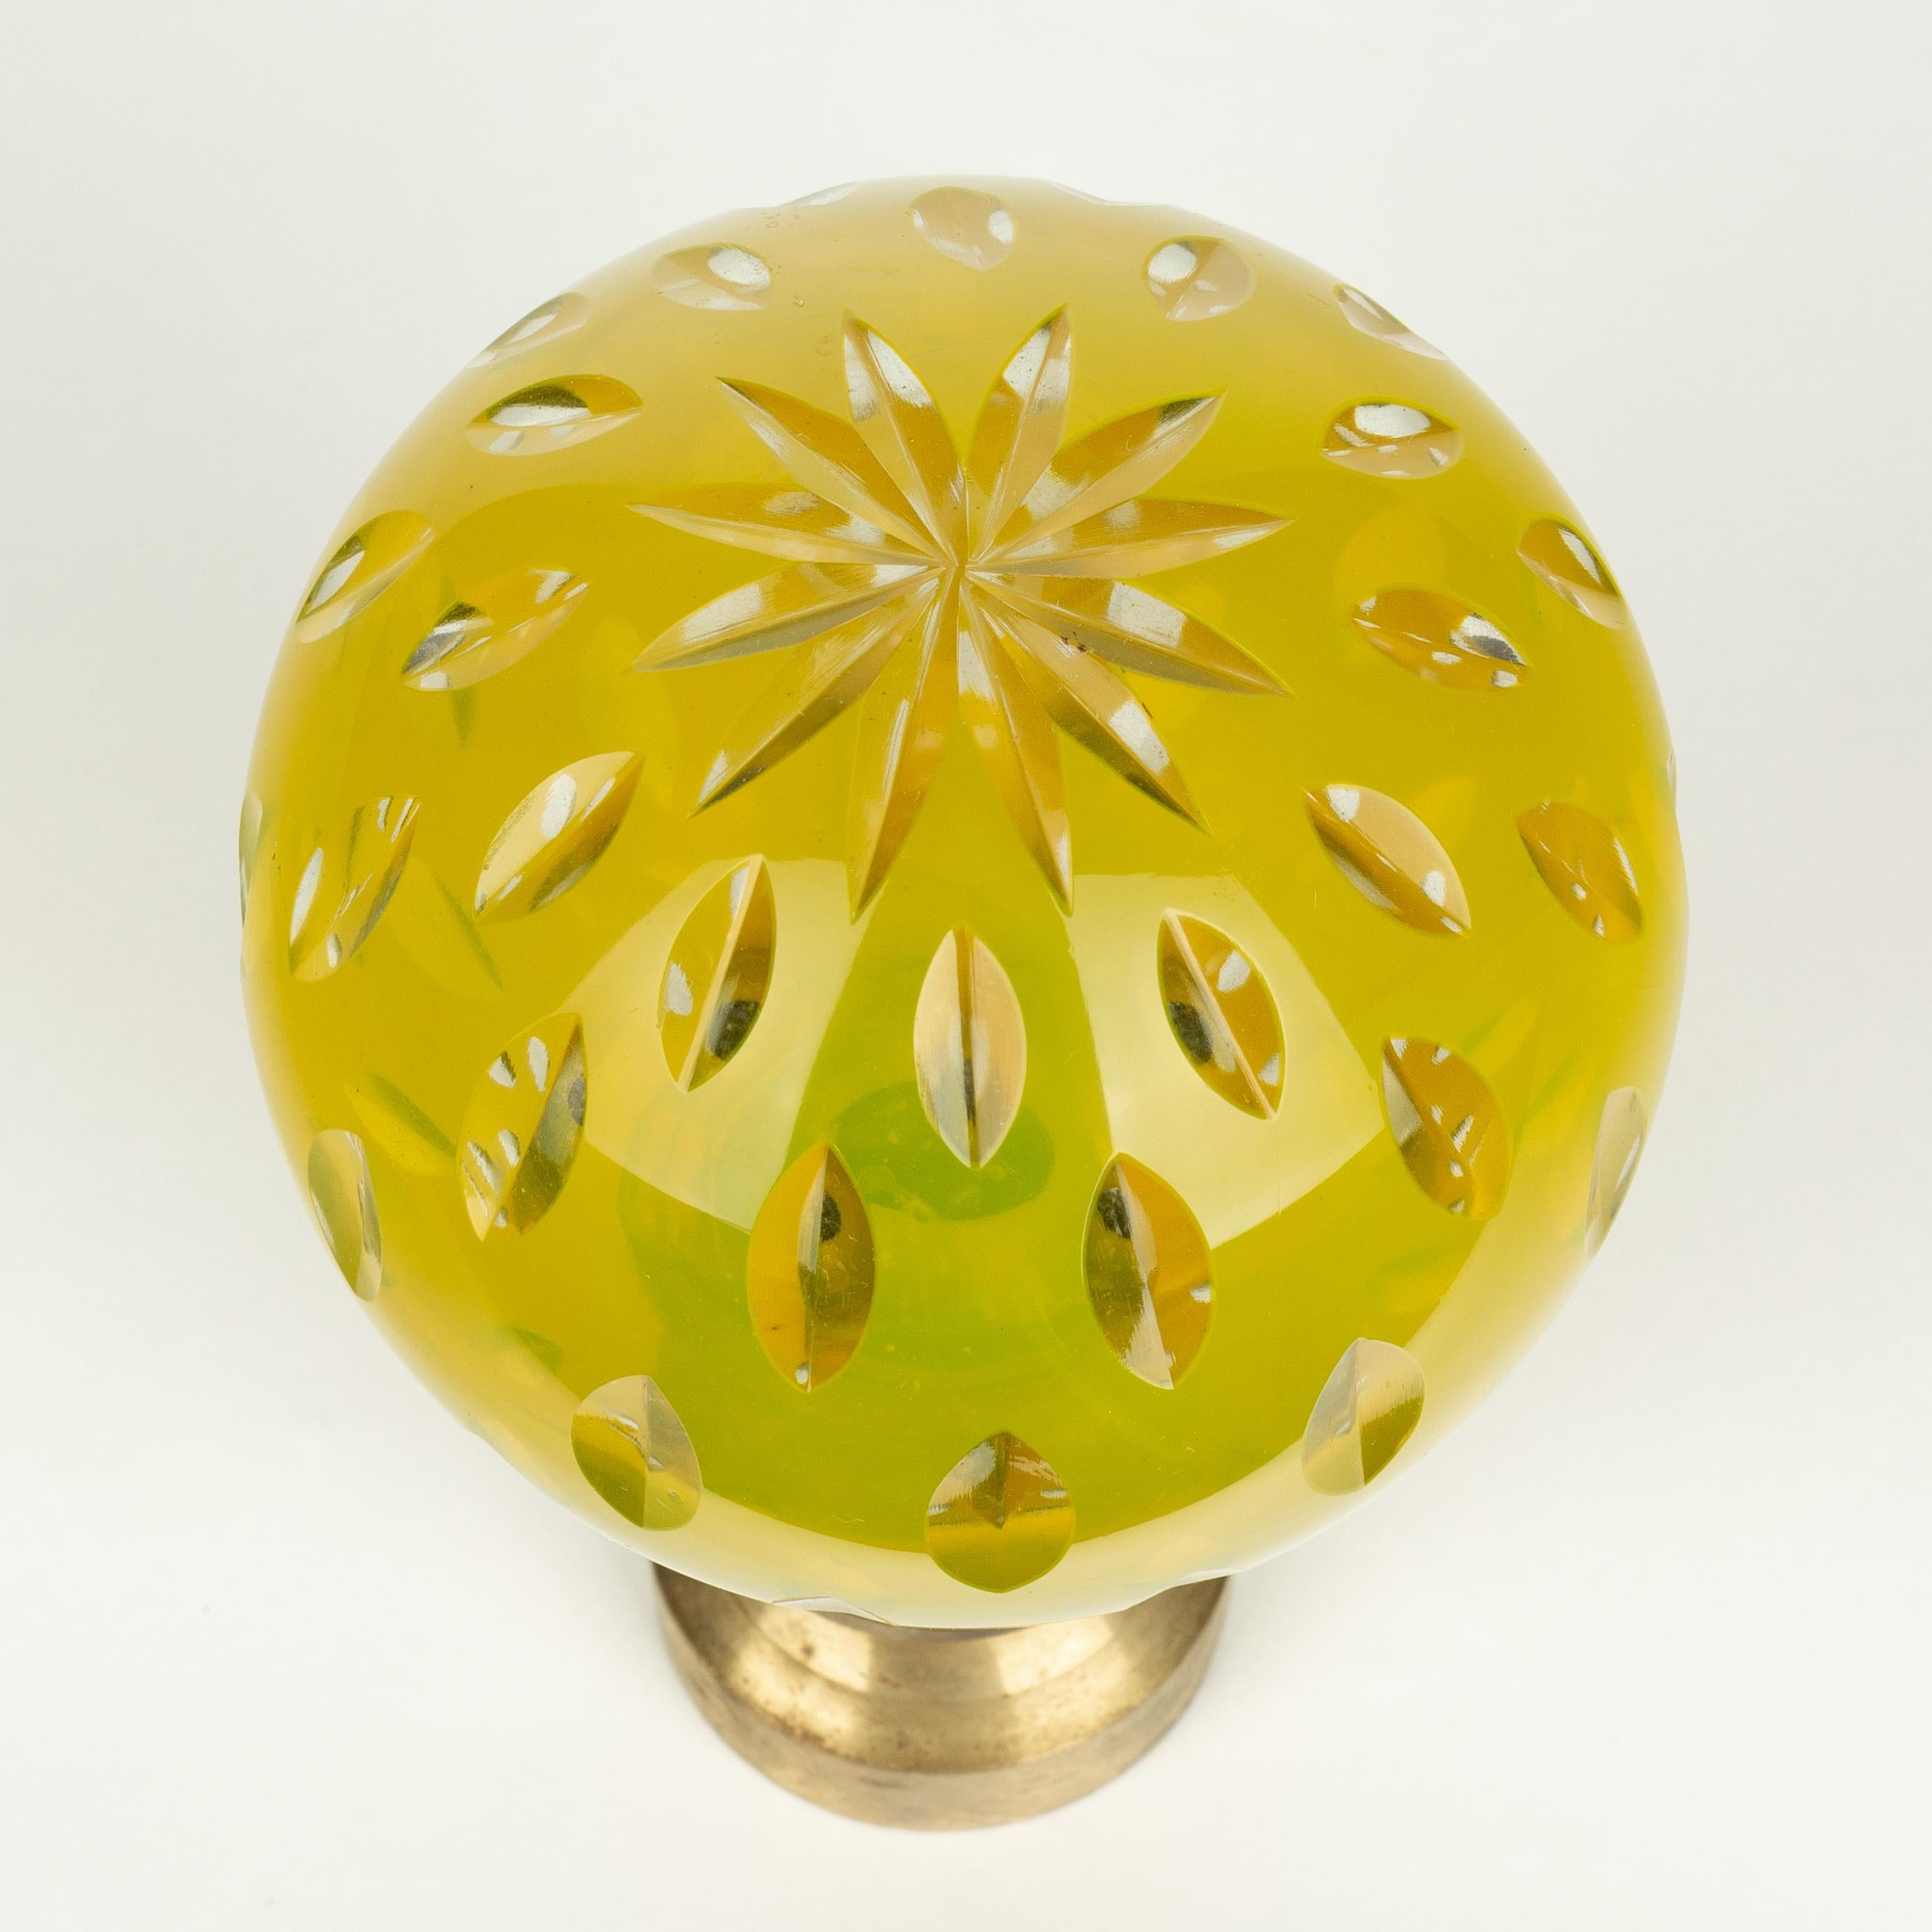 Brass French Glass Boule d'escalier or Newel Post Finial